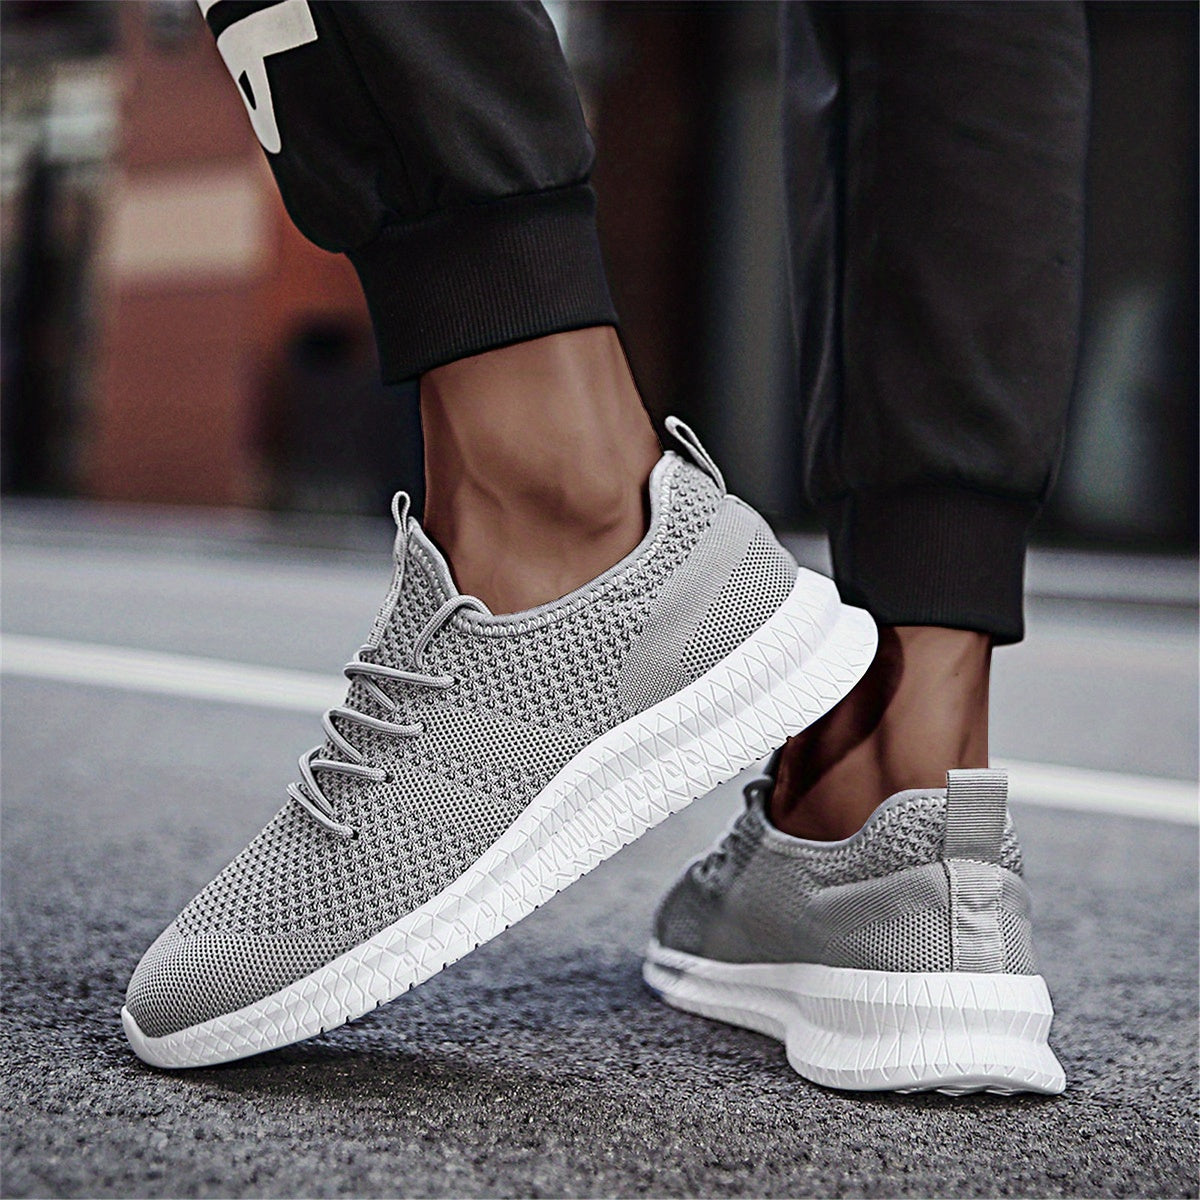 Men's Running Shoes Couple Knit Breathable Lightweight Running Shoes Outdoor Athletic Walking Sneakers, Spring And Summer